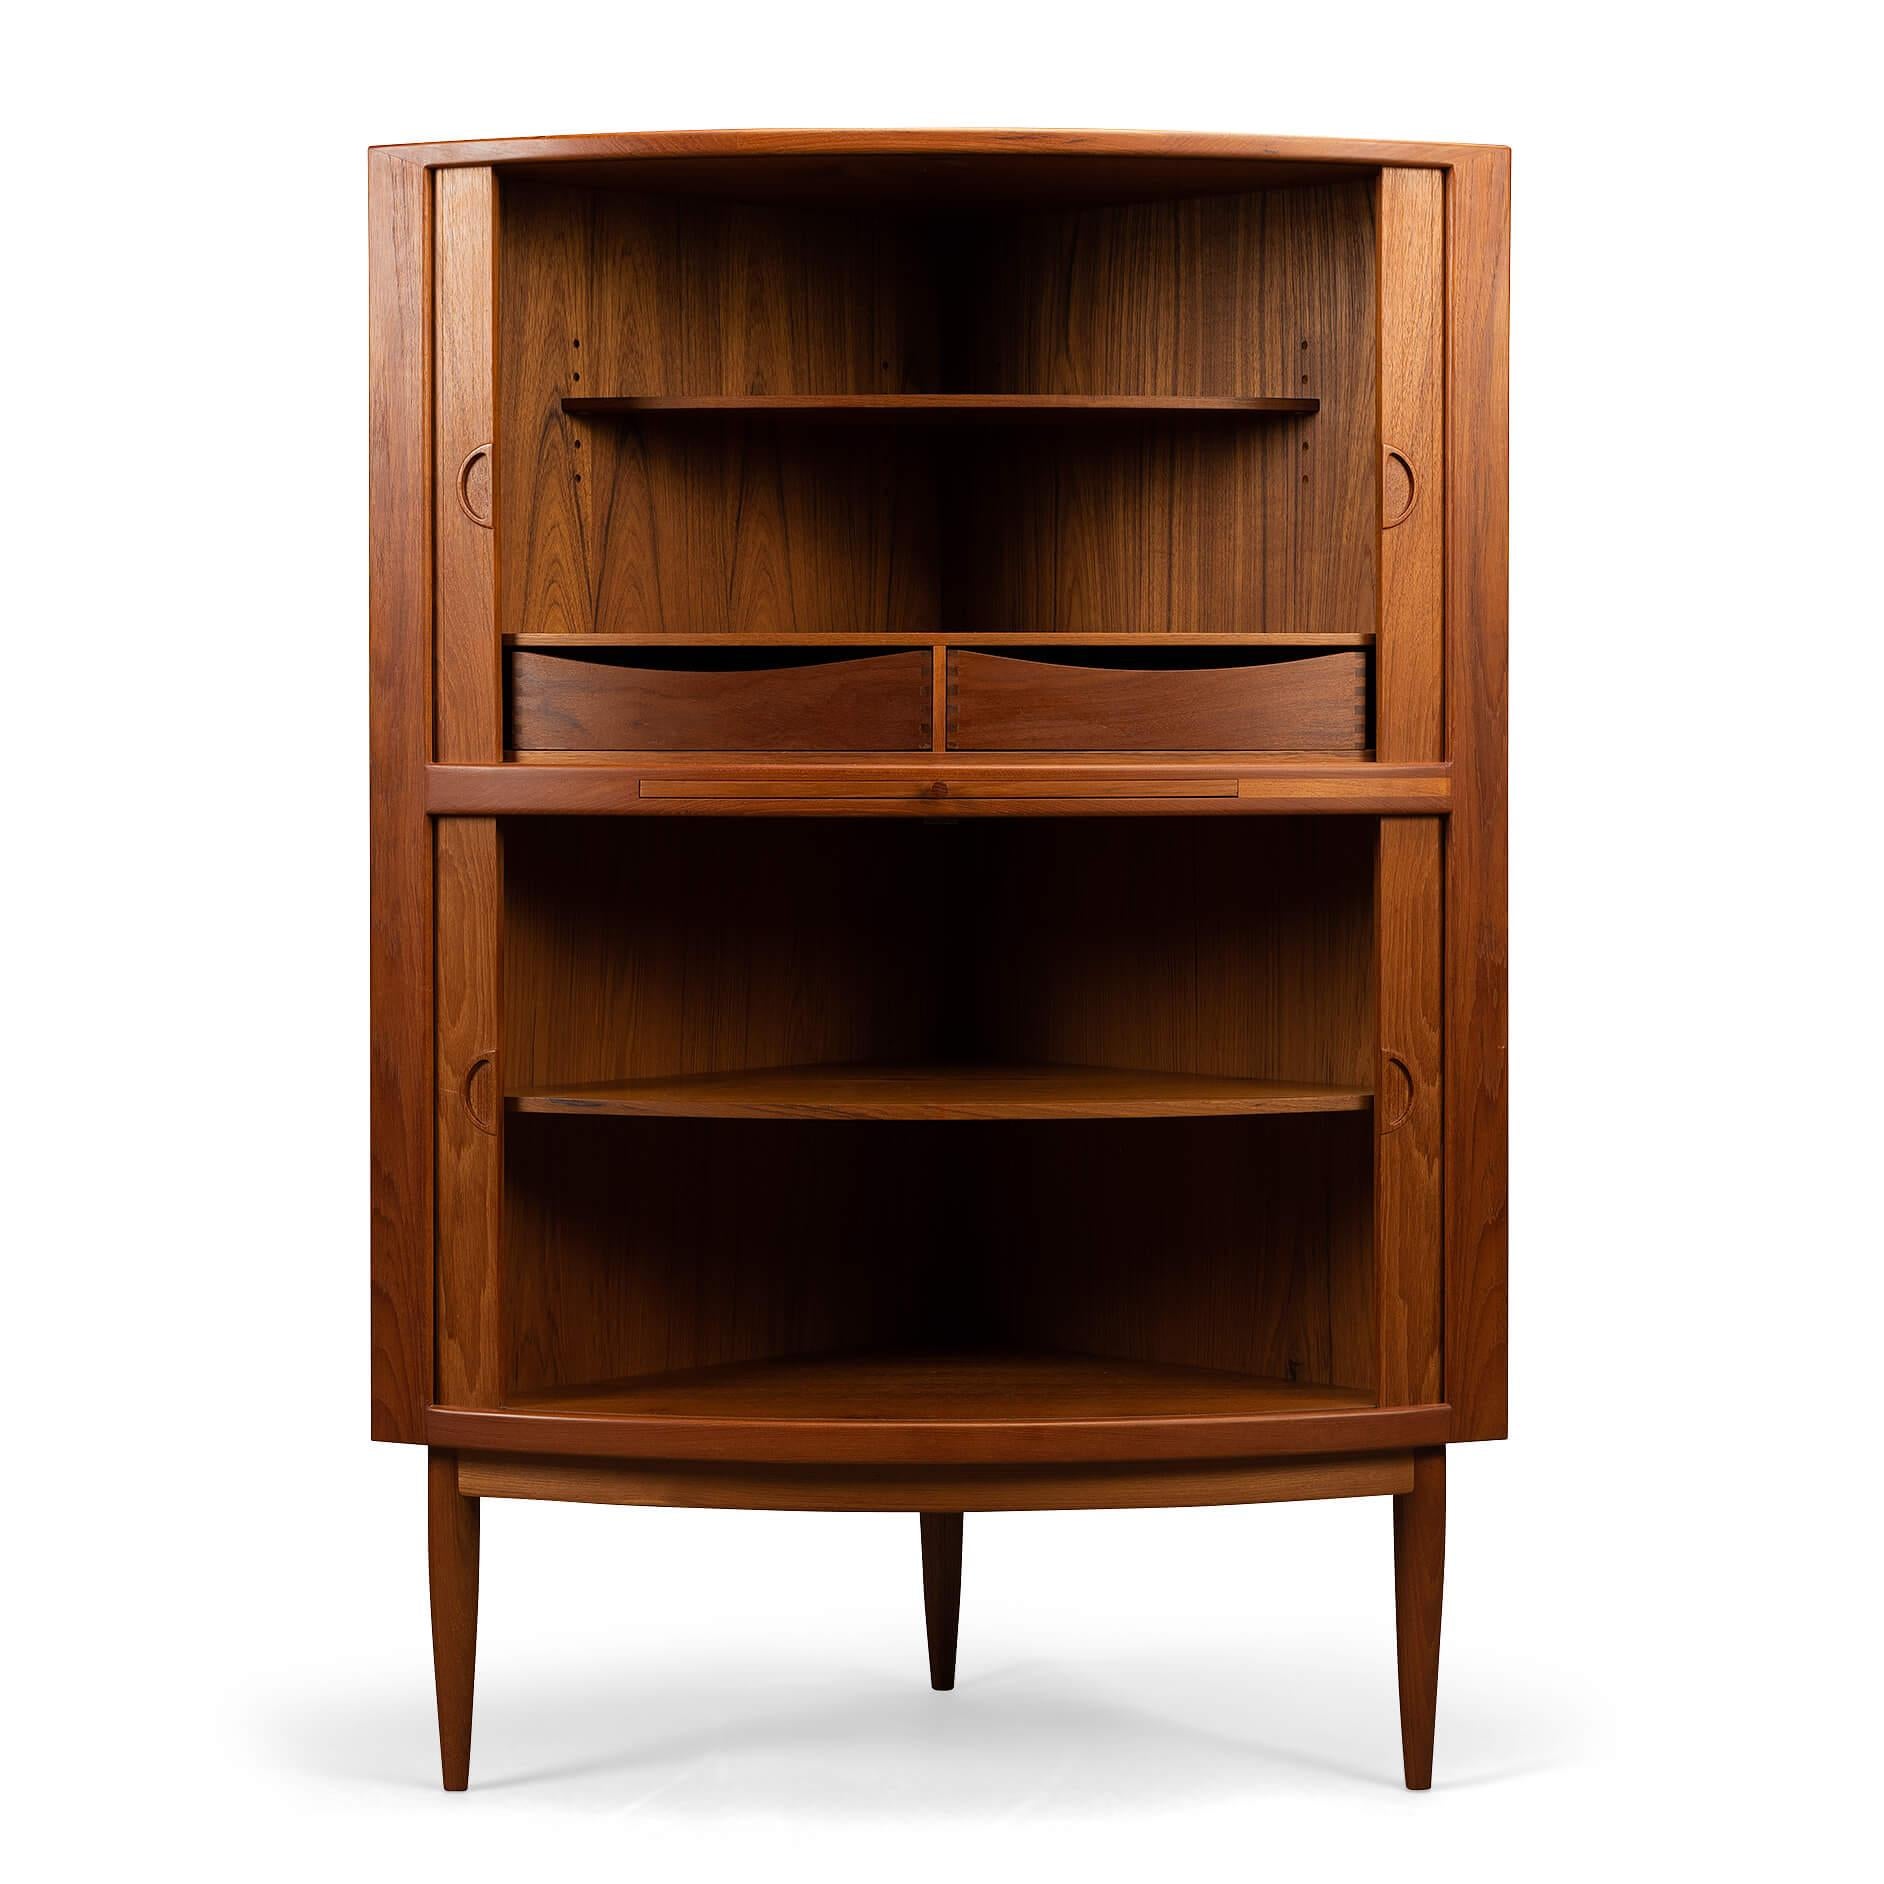 Midcentury Modern : Danish Design
Always coveted a cabinet for your single malt collection? Well, this corner bar and cabinet may be just your thing. The cabinet comes with bar and storage section, space for glassware, smoking bits, and an